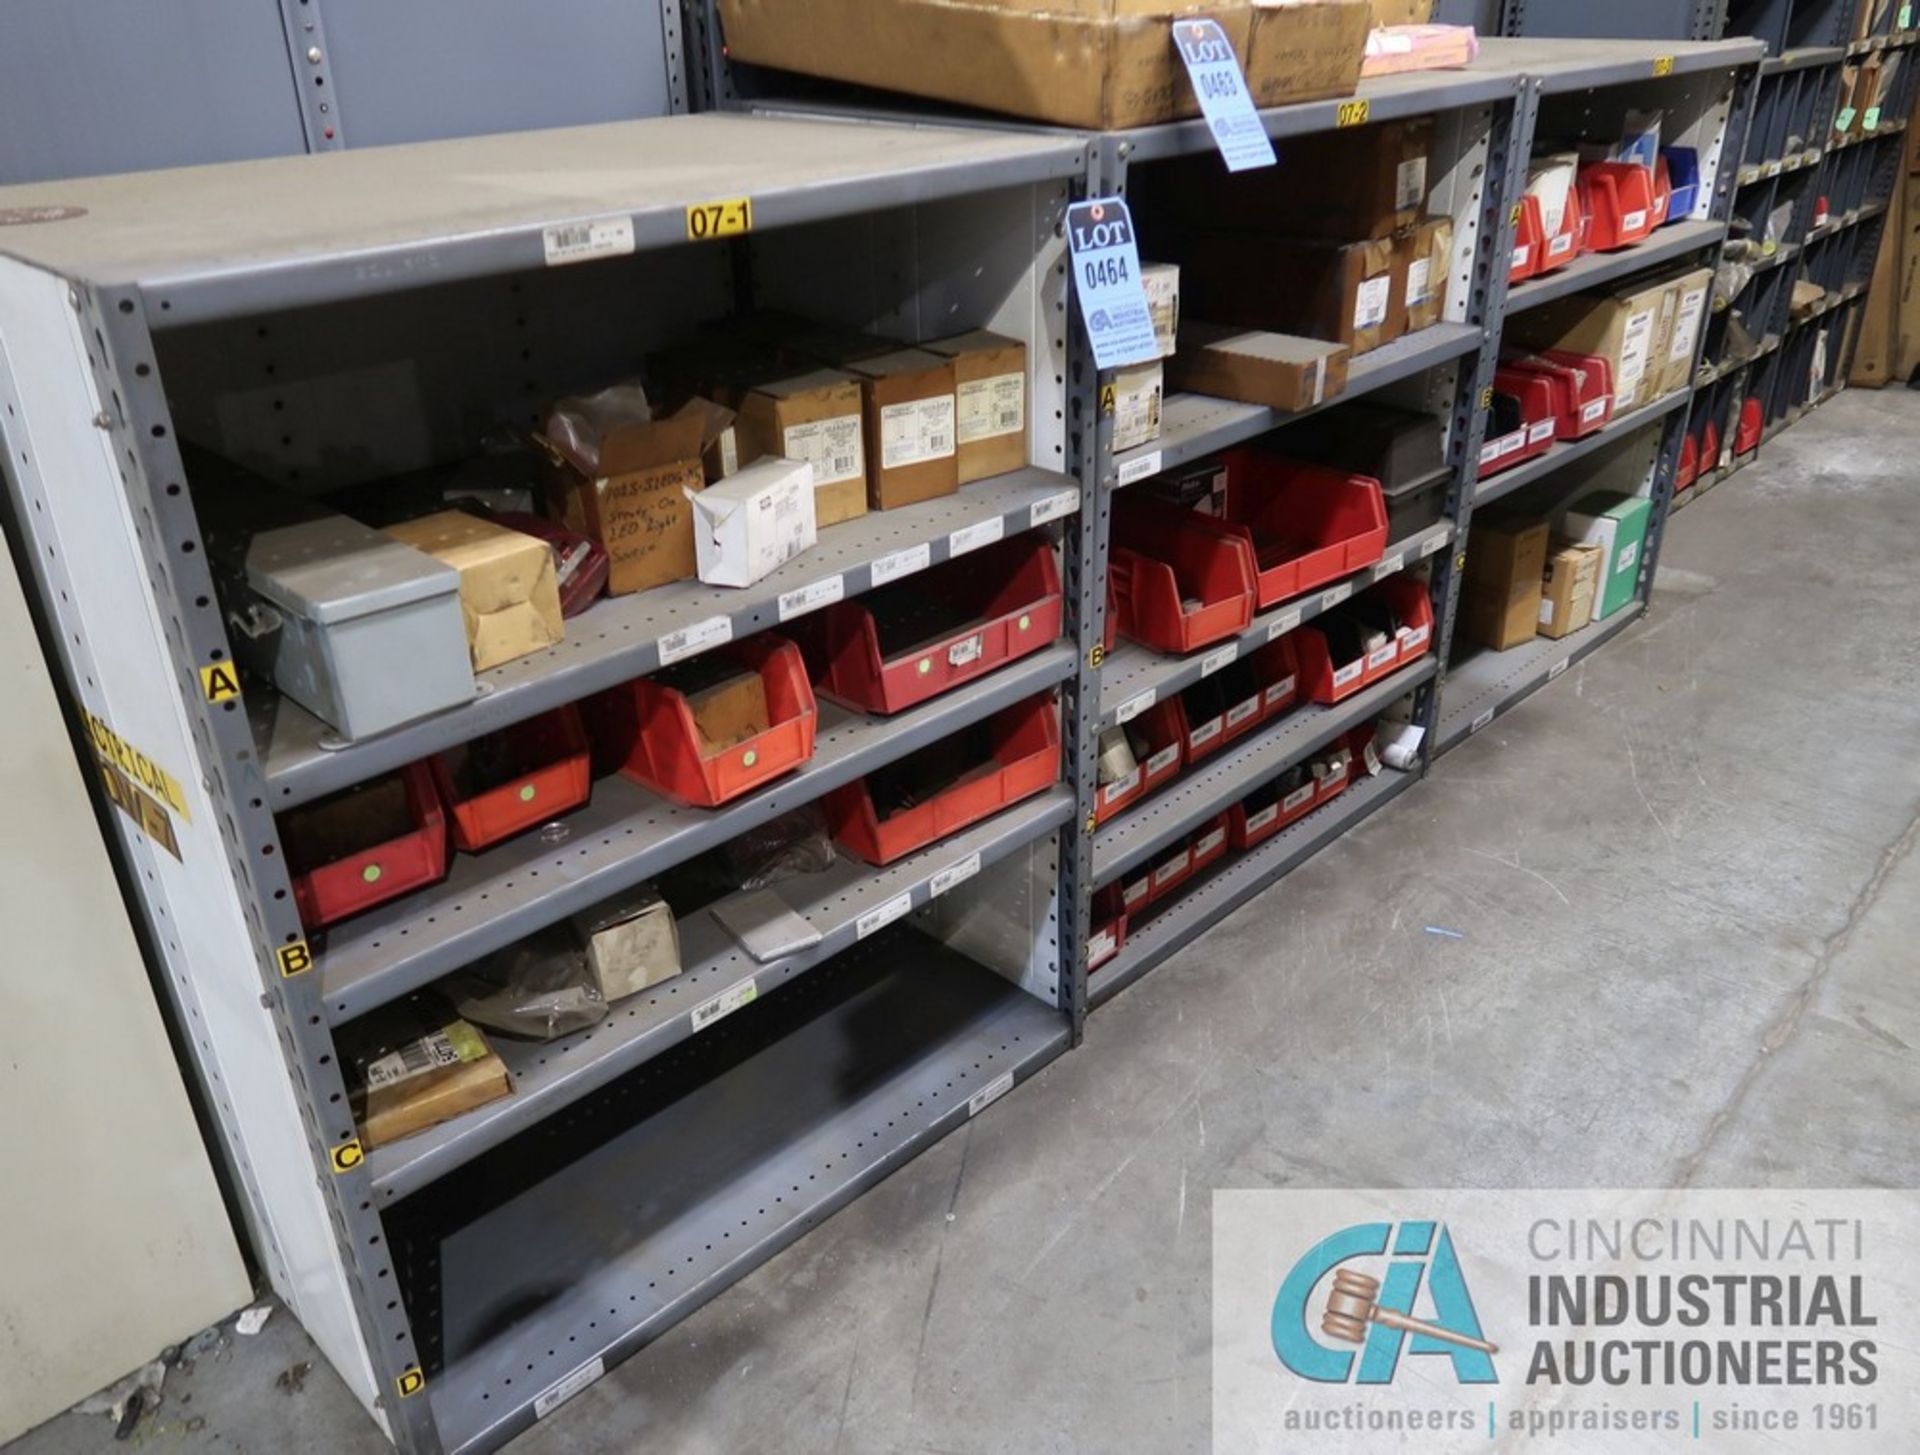 (LOT) CONTENTS ONLY (3) SECTIONS SHELVING; ELECTRICAL MAINTENANCE ITEMS, BULBS, SWITCHES AND OTHER